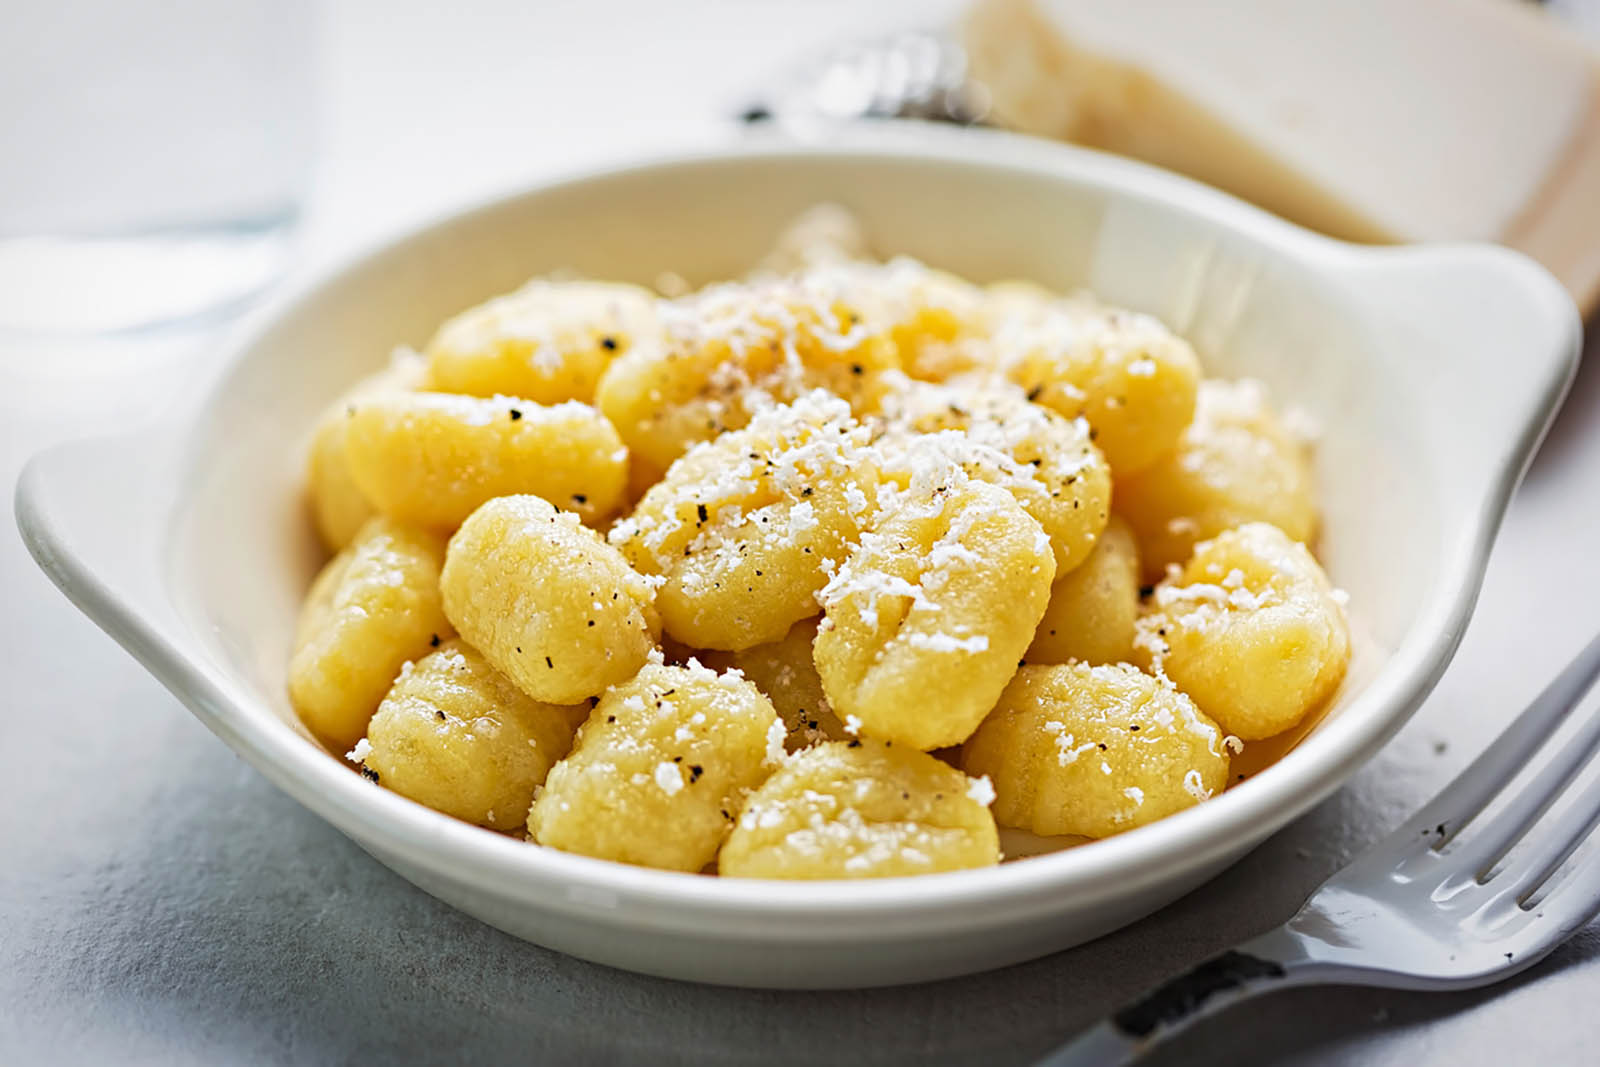 🥔 Can We Guess Your Generation Based on the Different Ways You’ve Eaten Potatoes? Gnocchi